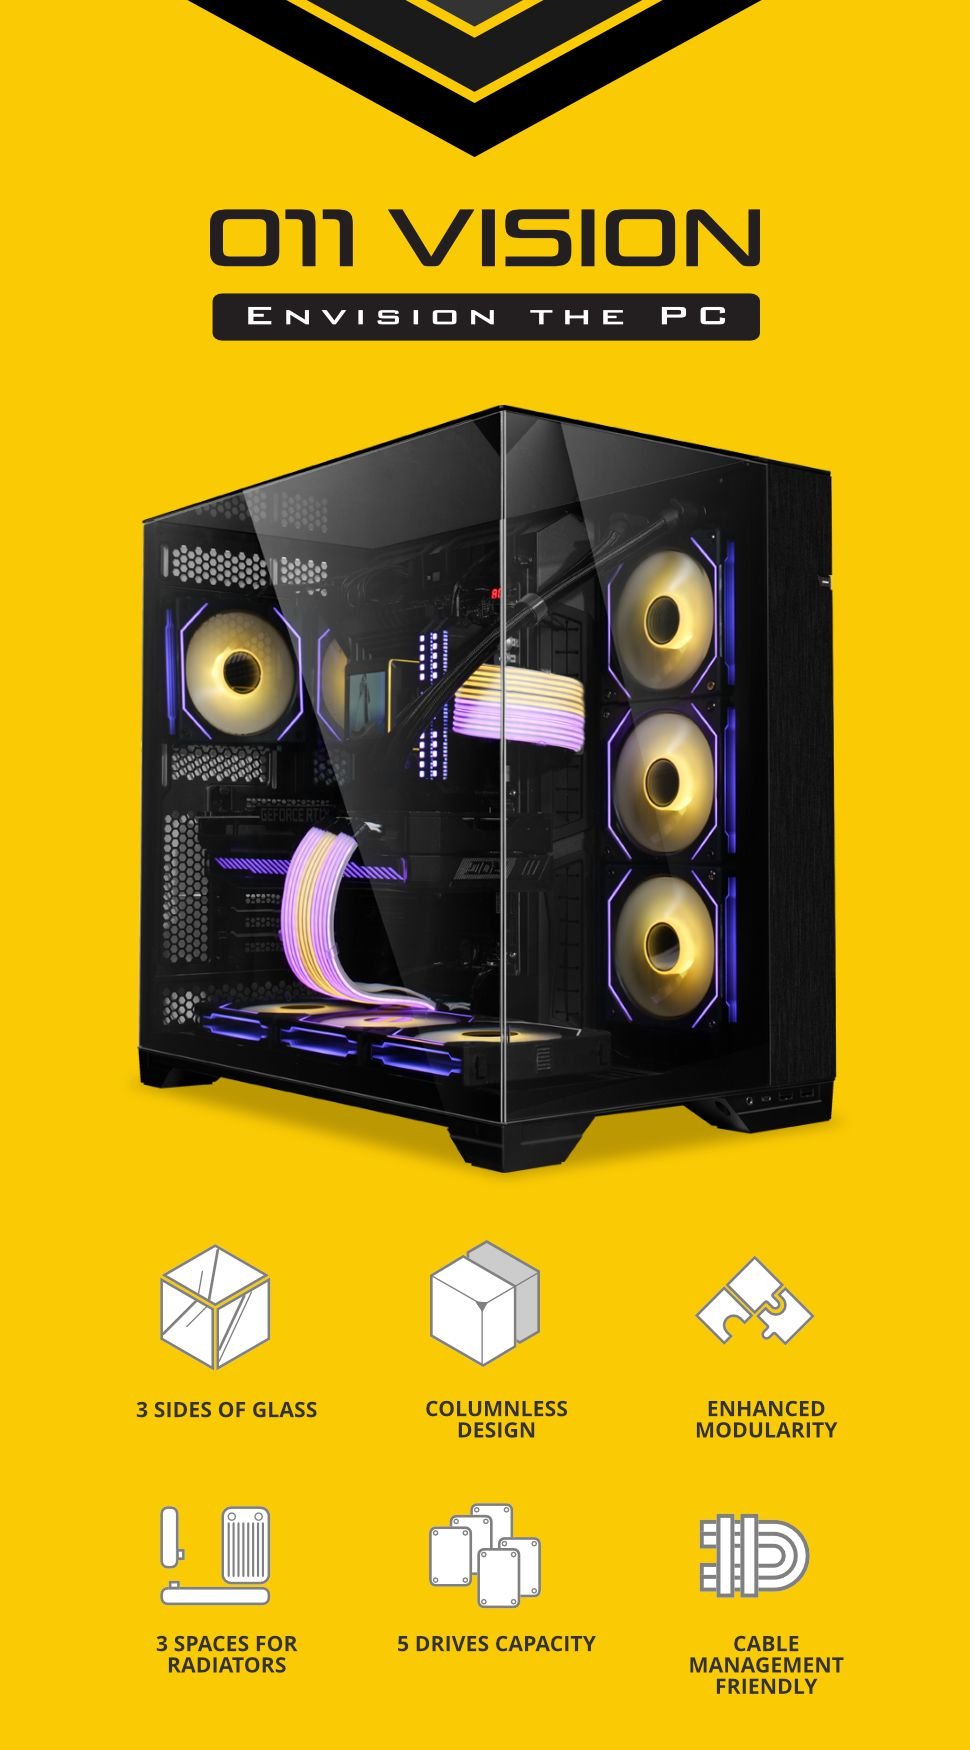 Lian Li and PC Master Race teamed up to launch the O11 Vision PC case with  3-sided tempered glass 